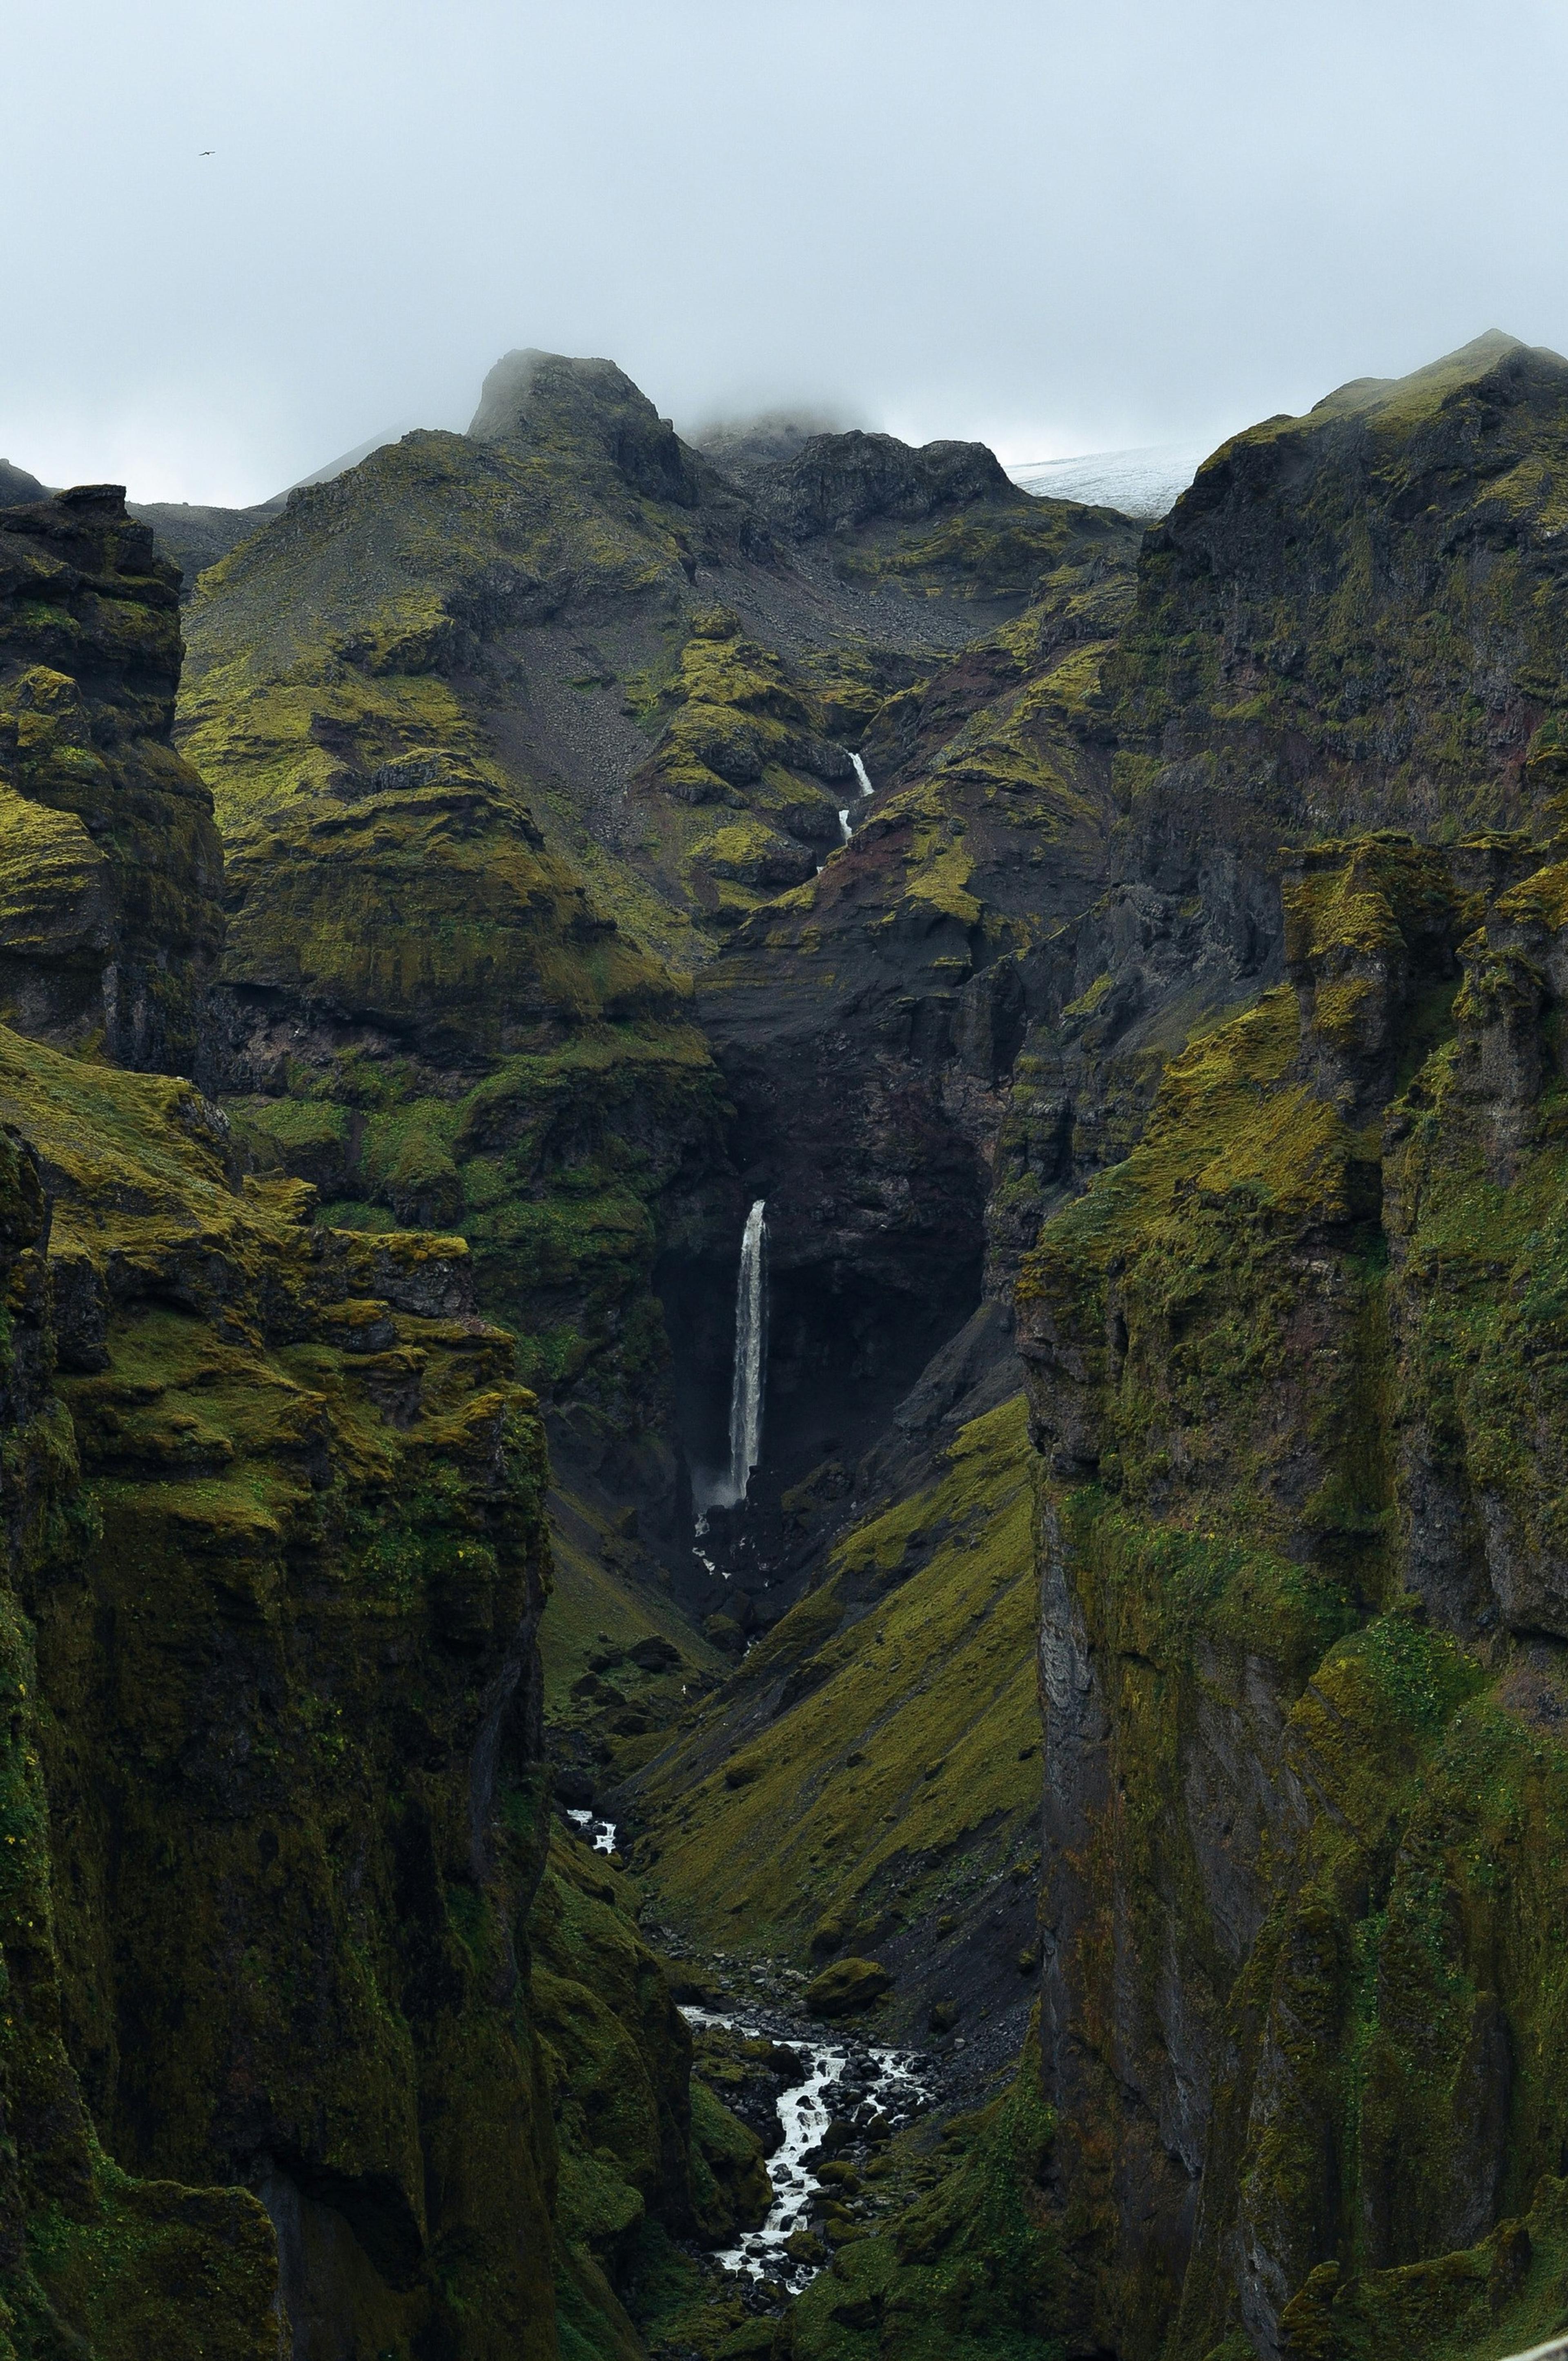 View of Mulagljufur Canyon with a vertical waterfall descending into a lush, green gorge, shrouded in mist.